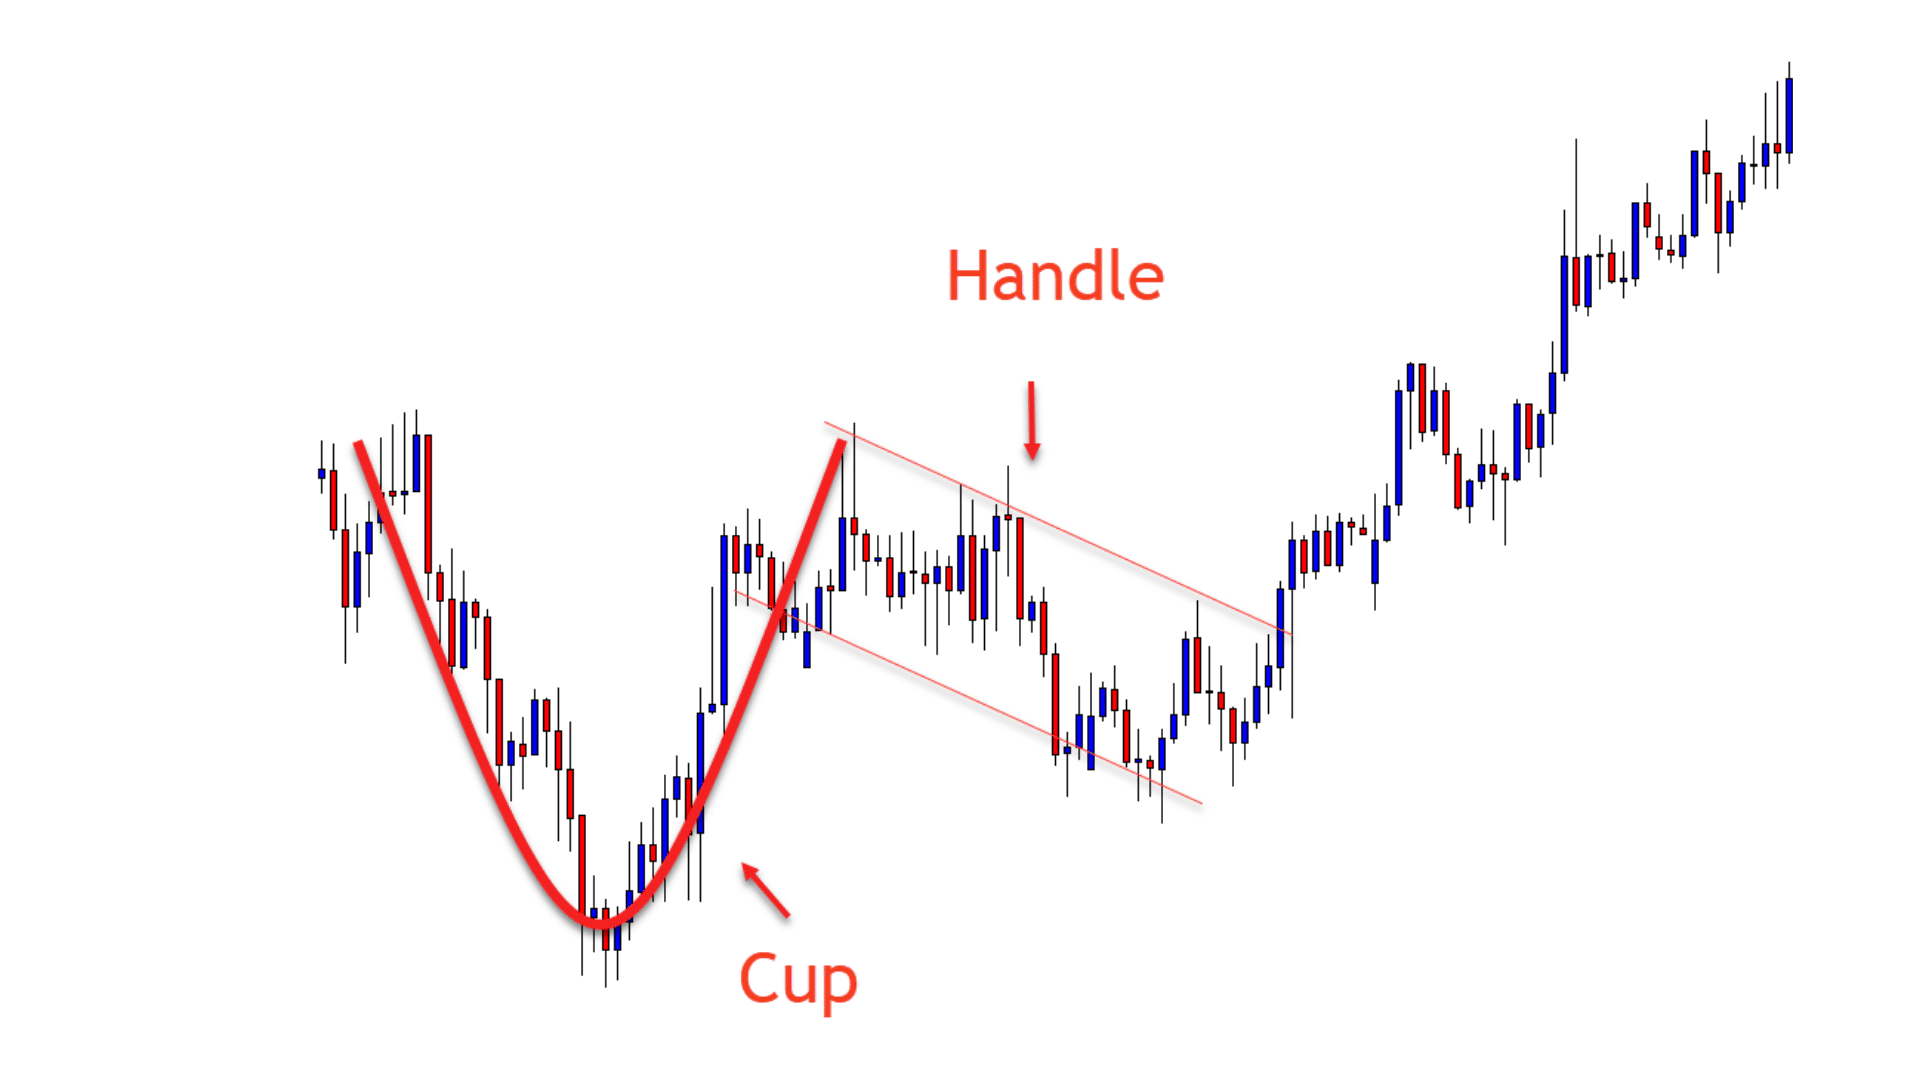 https://www.forexschoolonline.com/wp-content/uploads/2020/12/cup-handle-trading.png